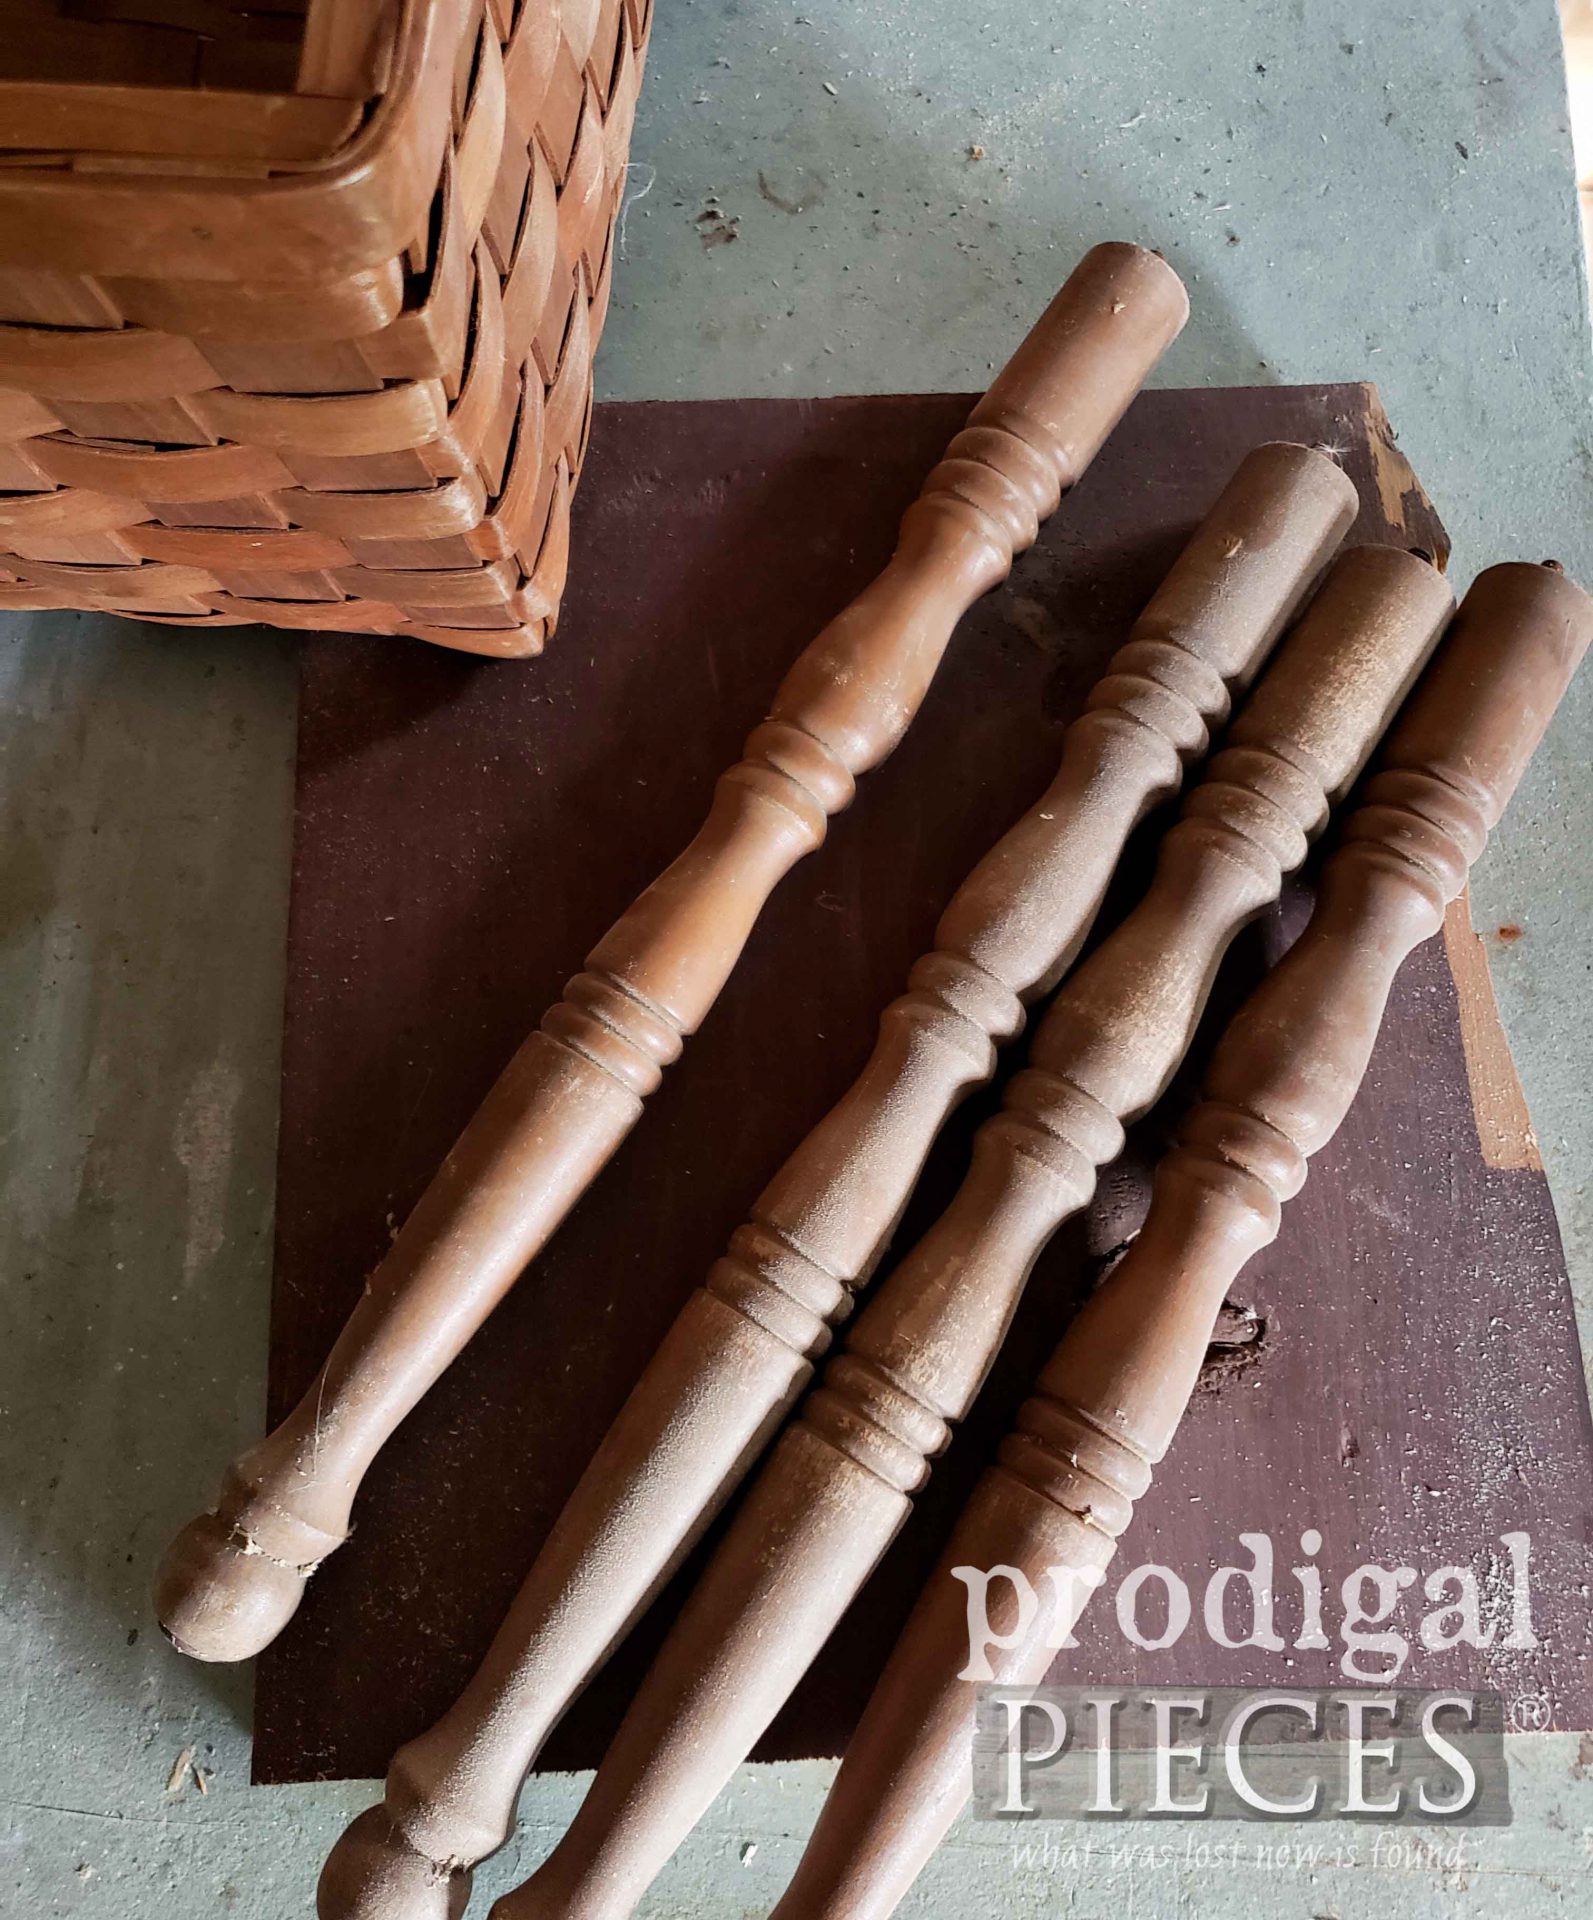 Scrap Spindles & Wood for Upcycled Basket Table by Prodigal Pieces | prodigalpieces.com